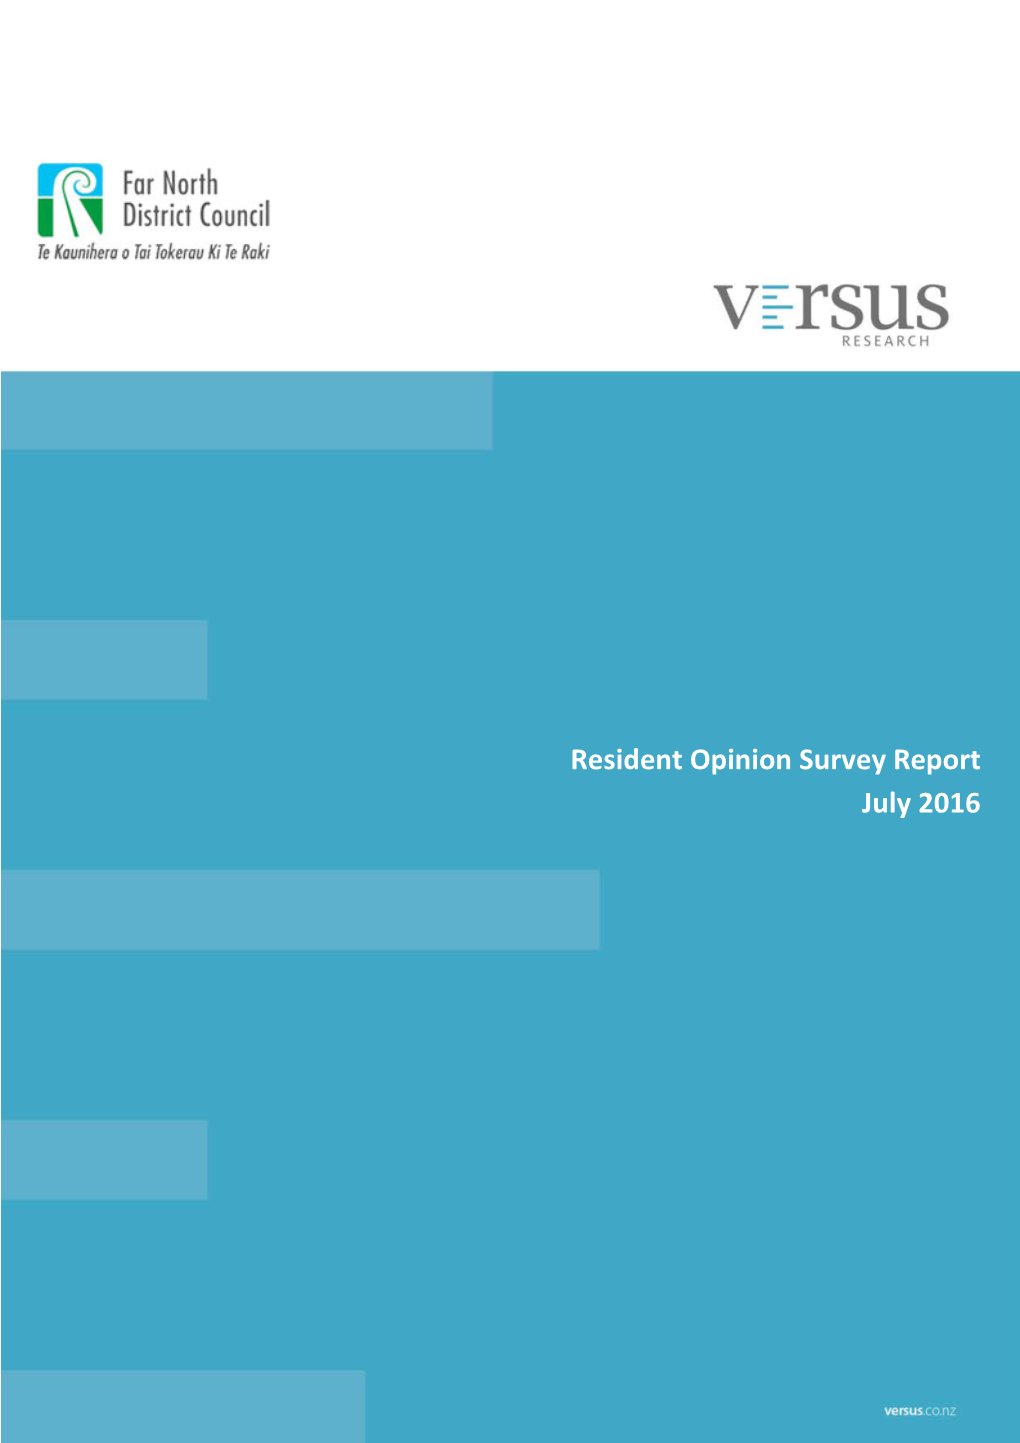 Resident Opinion Survey Report July 2016